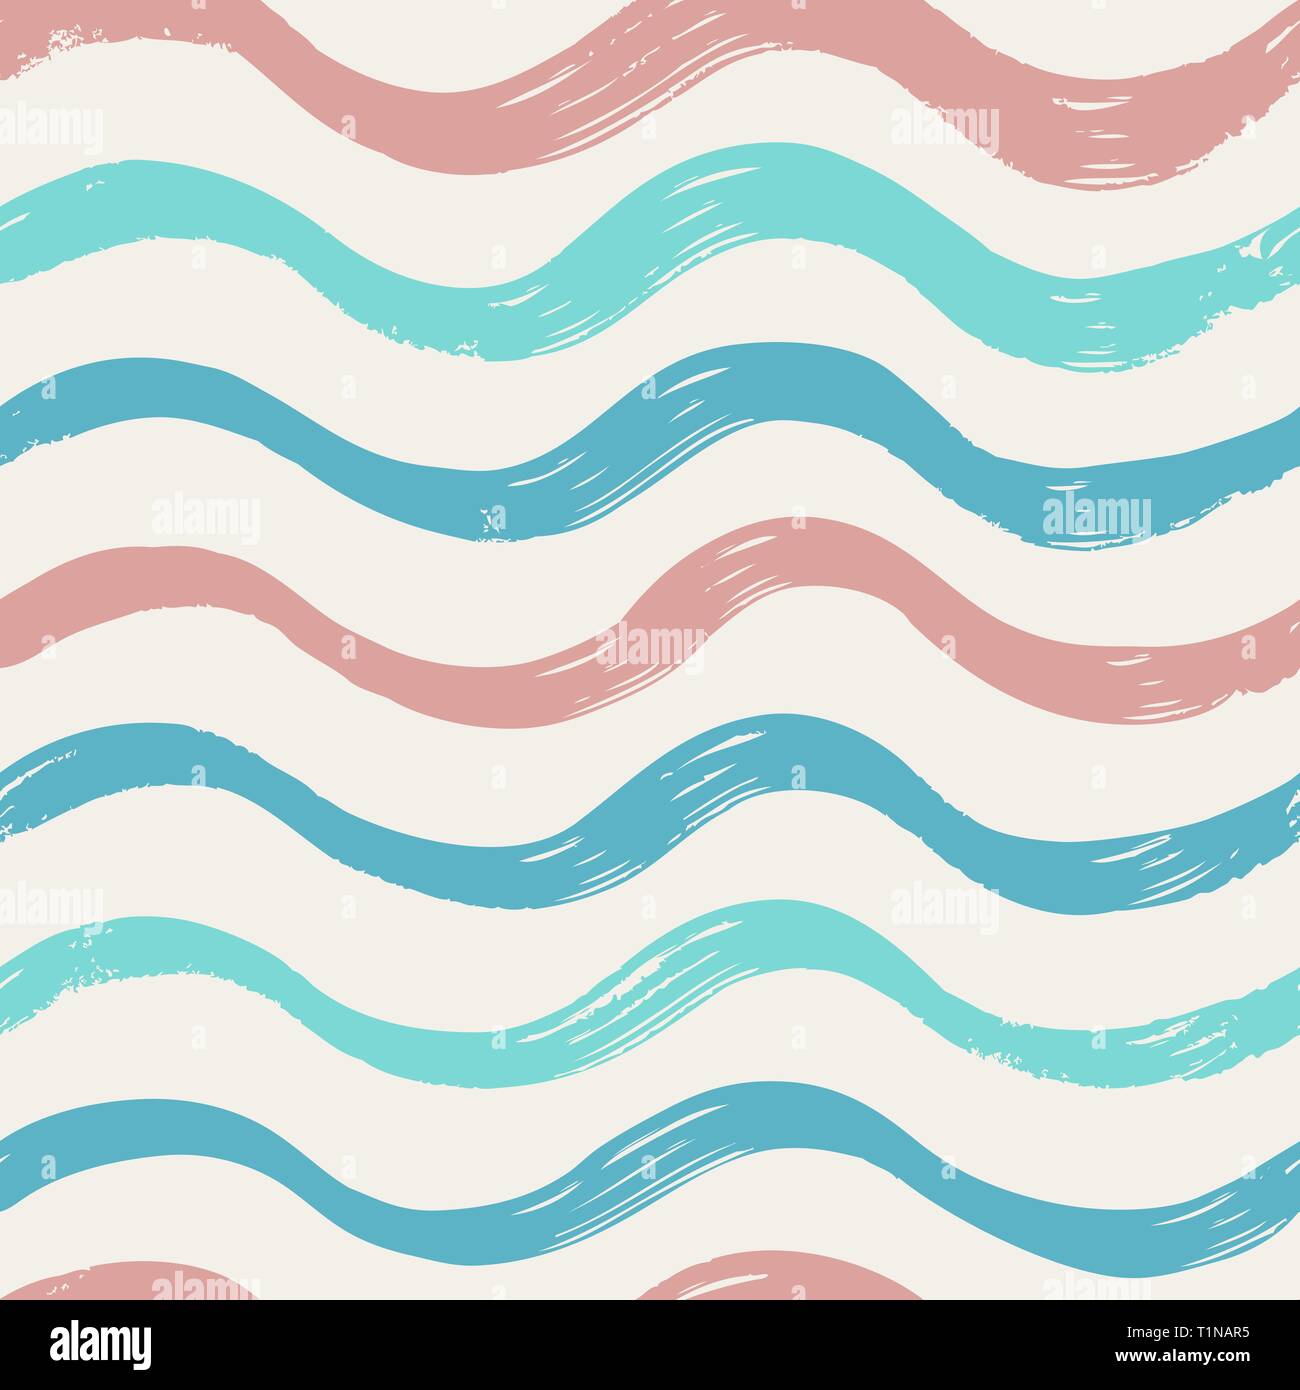 Hand drawn ethnic pattern. Seamless background. Vector Stock Vector